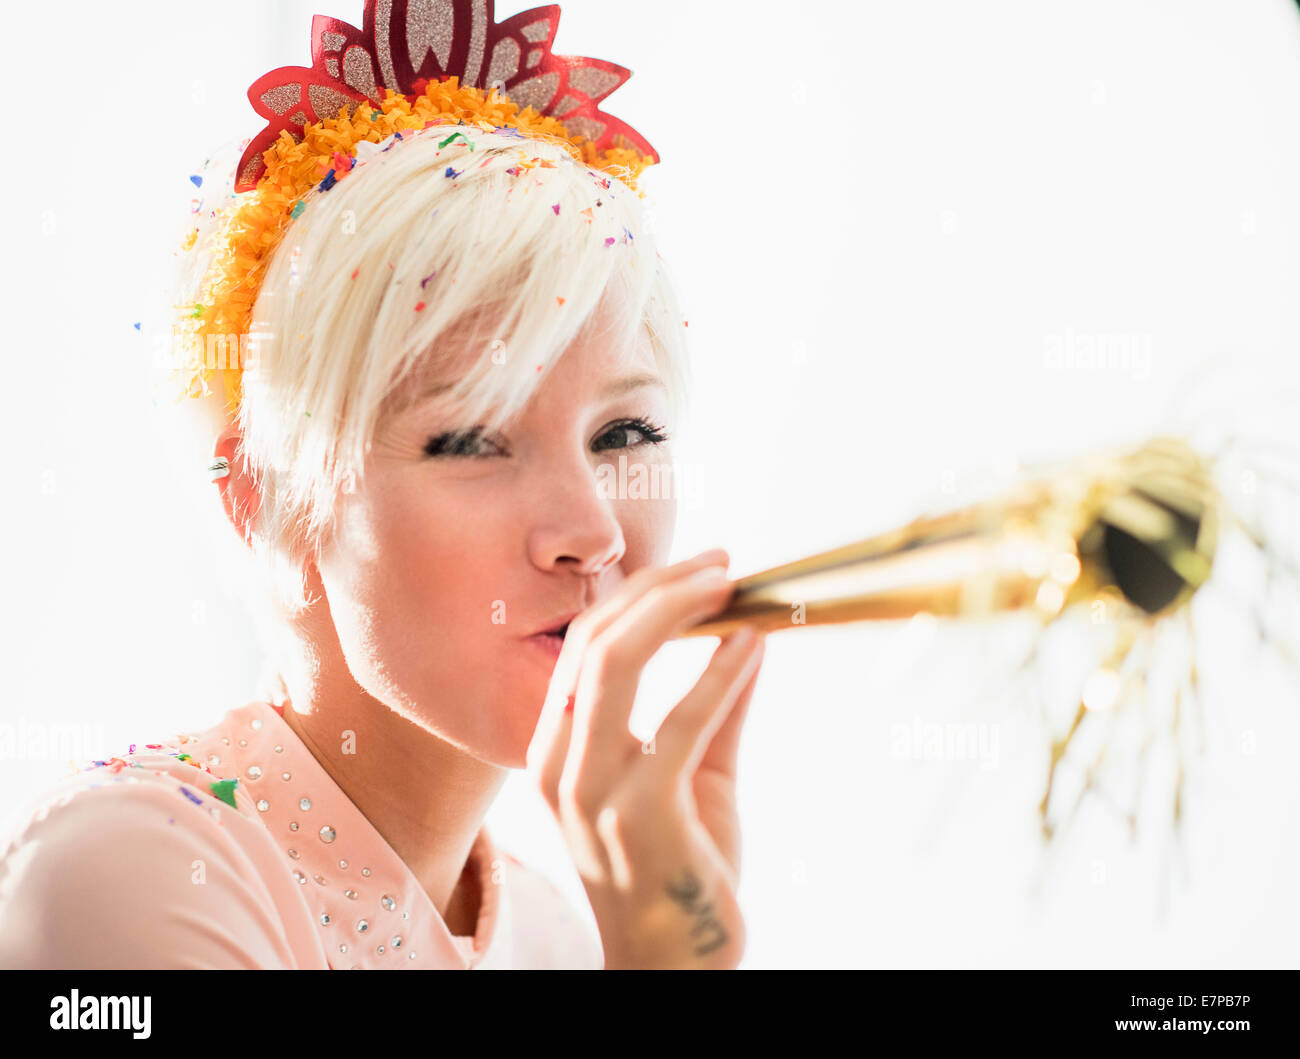 Woman wearing tiara blowing party horn blower Stock Photo